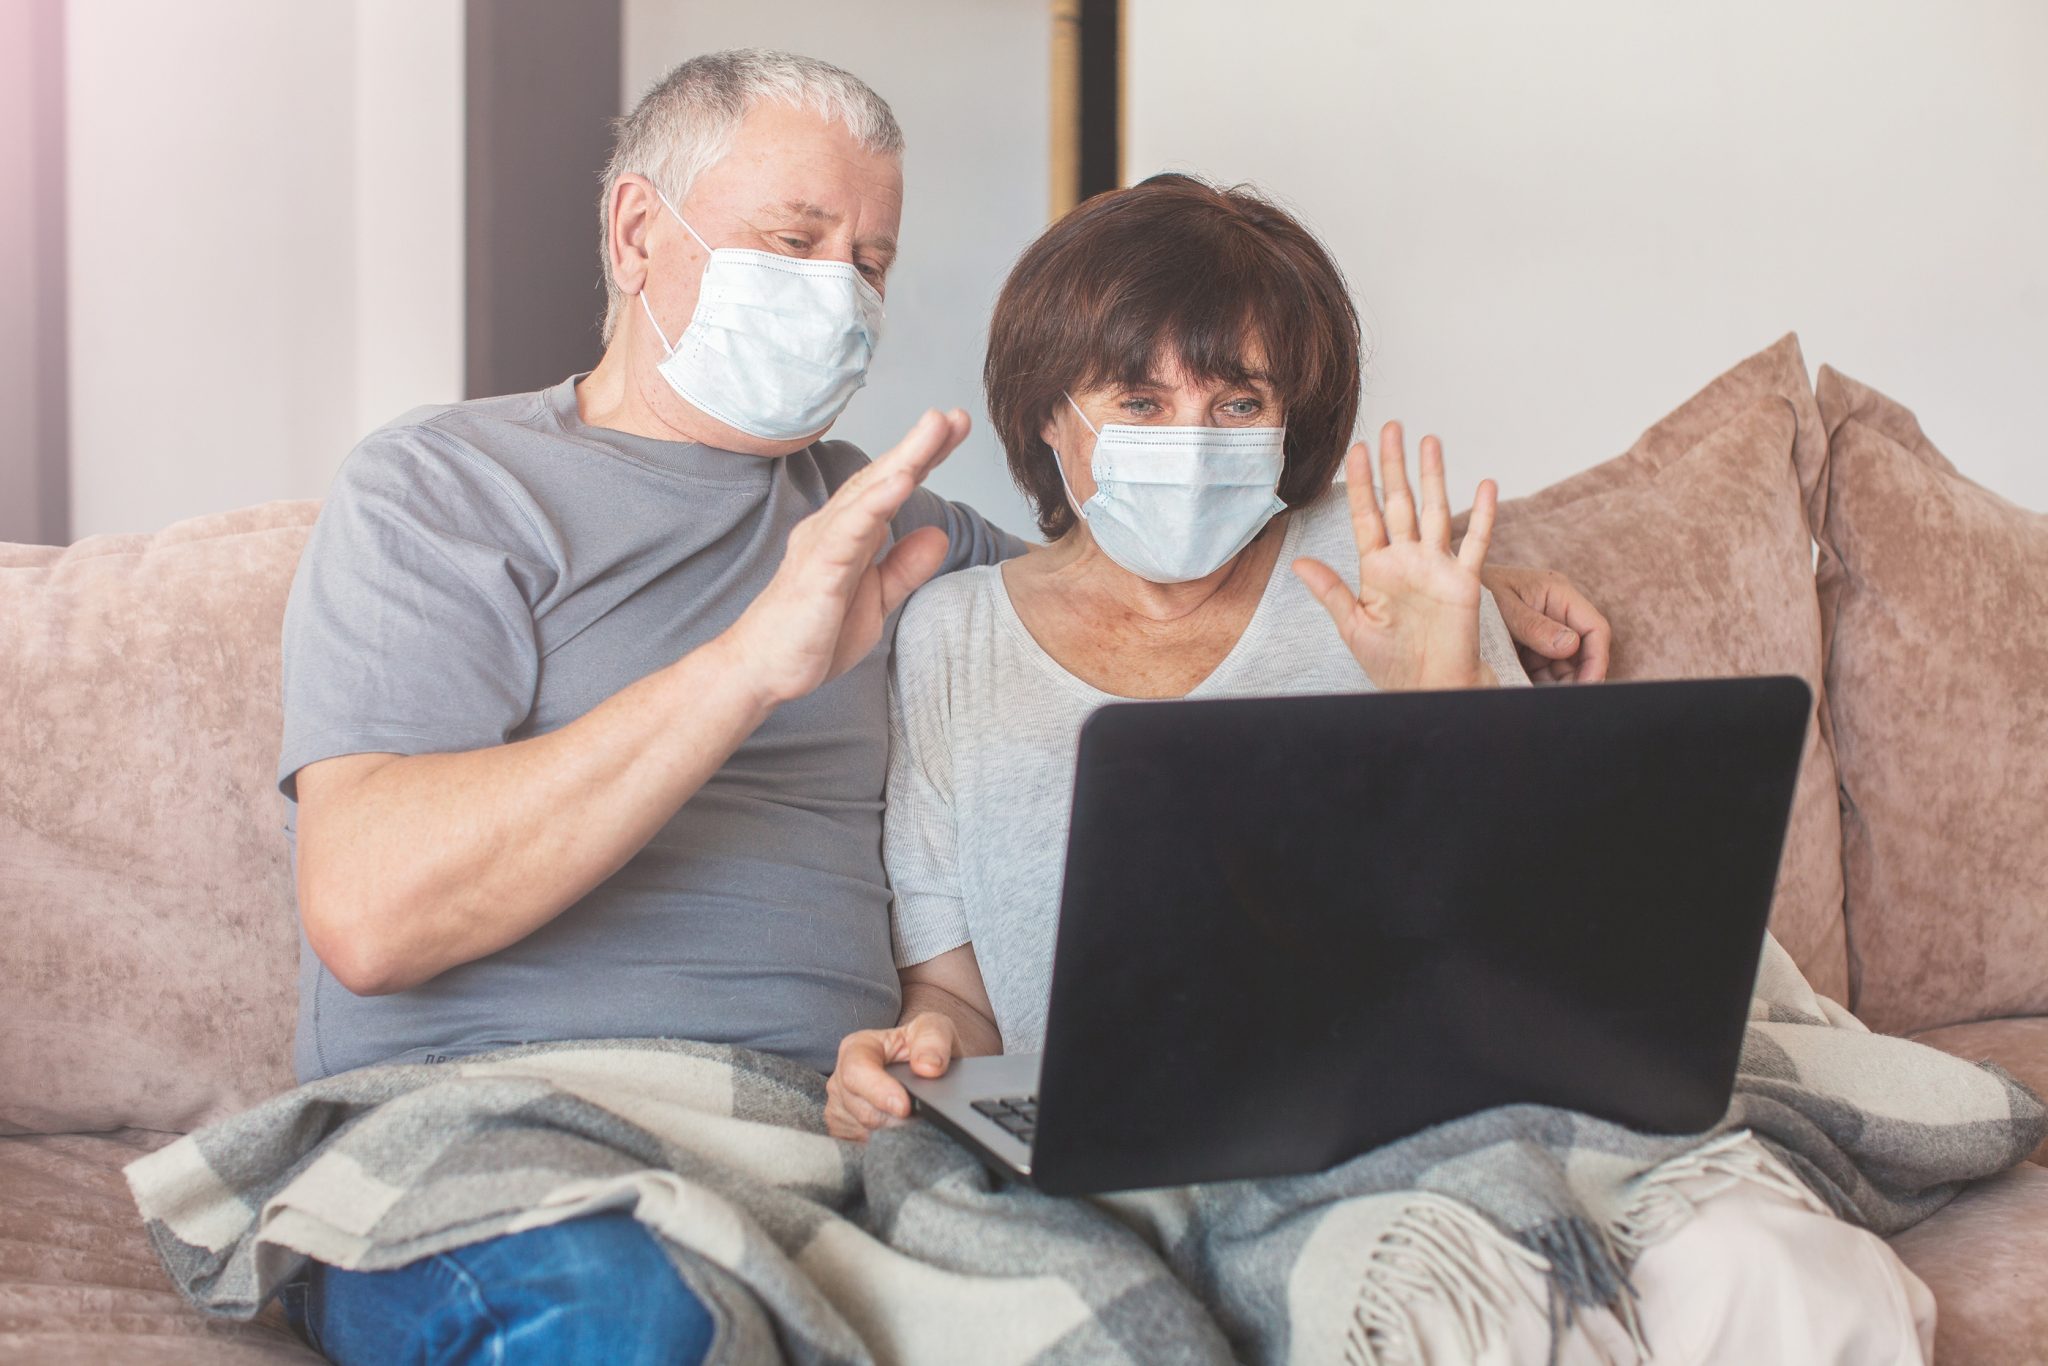 elderly couple wearing masks at home, digital qualitative research during covid